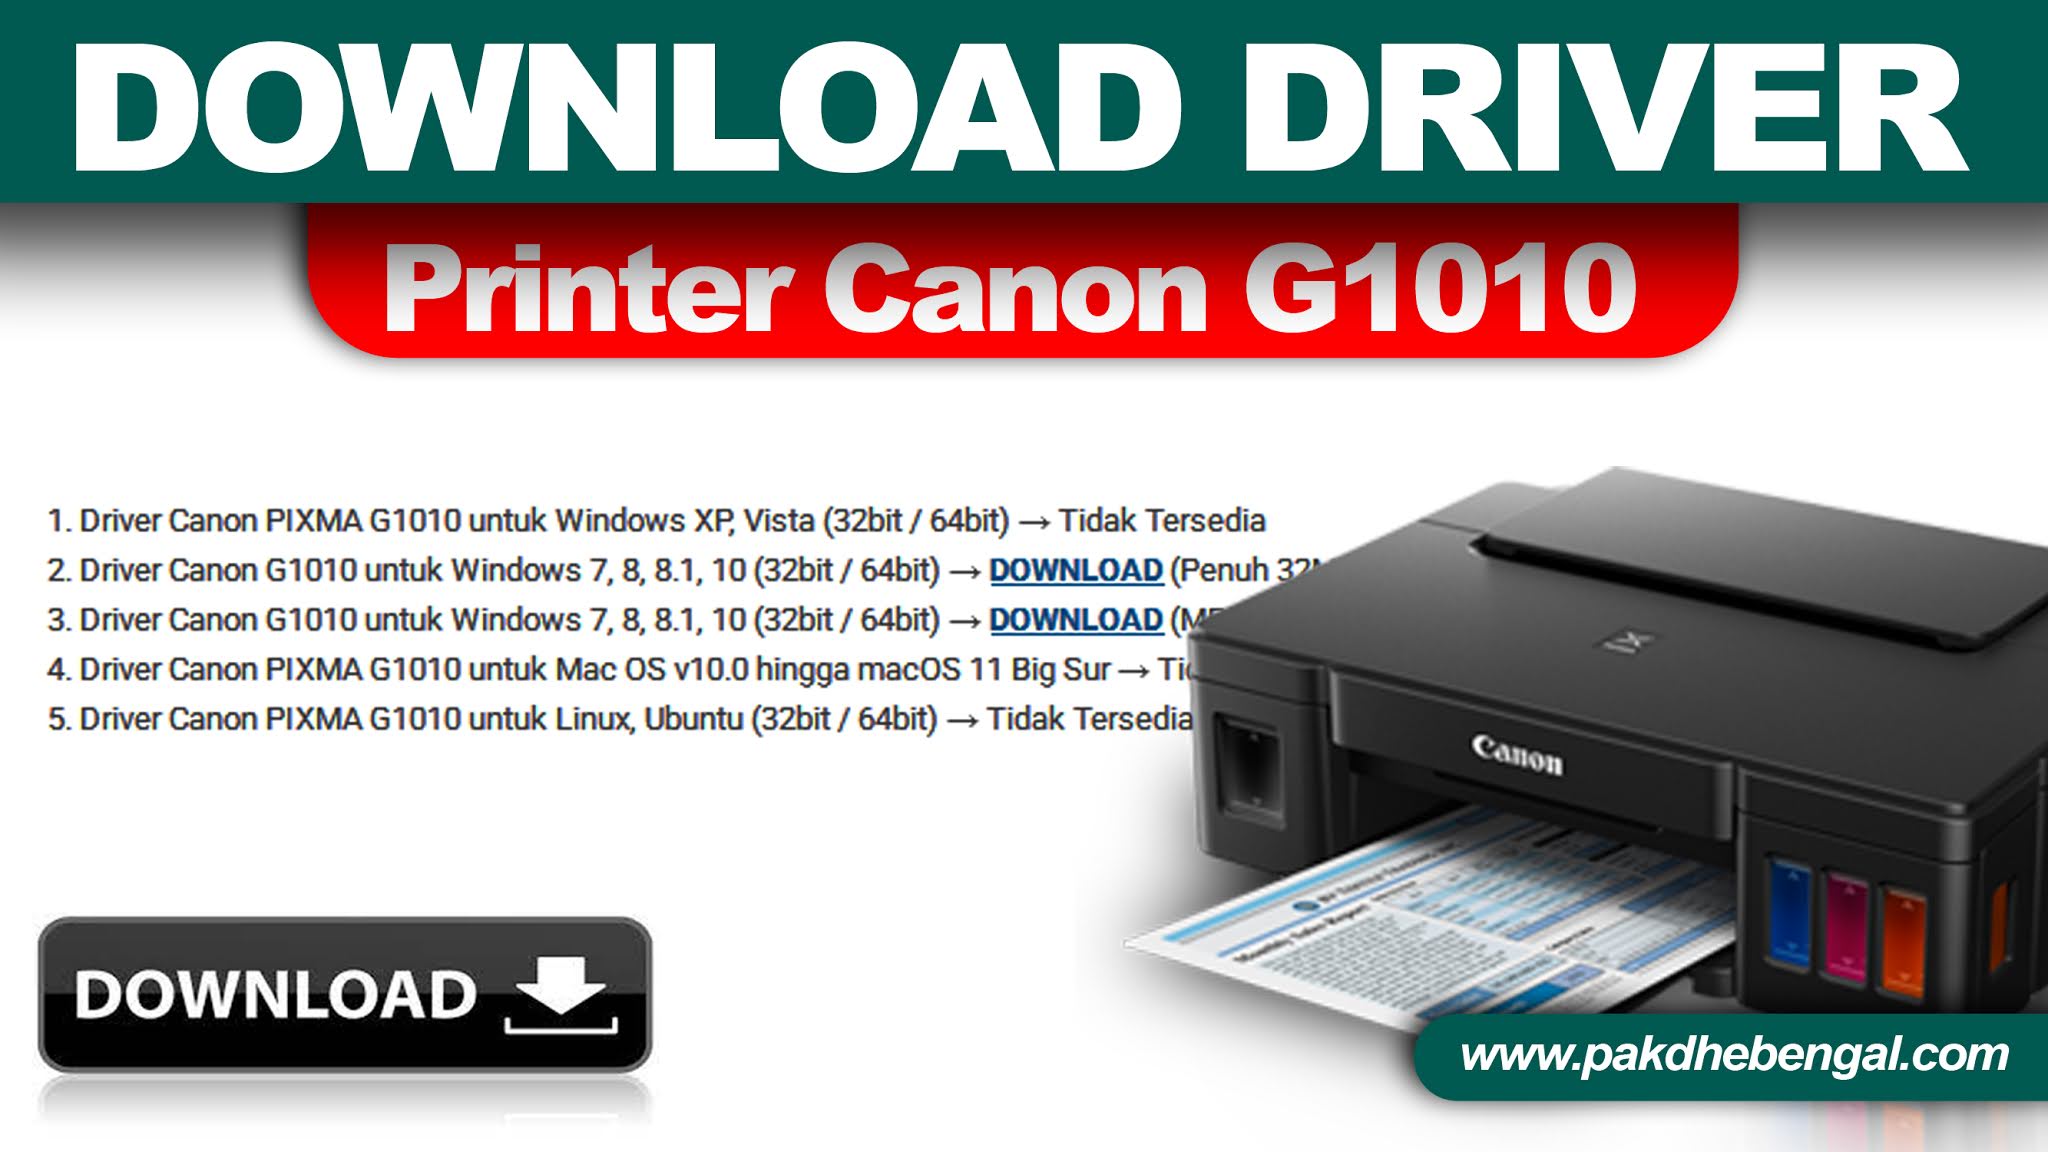 Free Download Driver Printer Canon G1010 Supported Operating Systems Are Windows 7 To Windows 10 Pakdhe Bengals